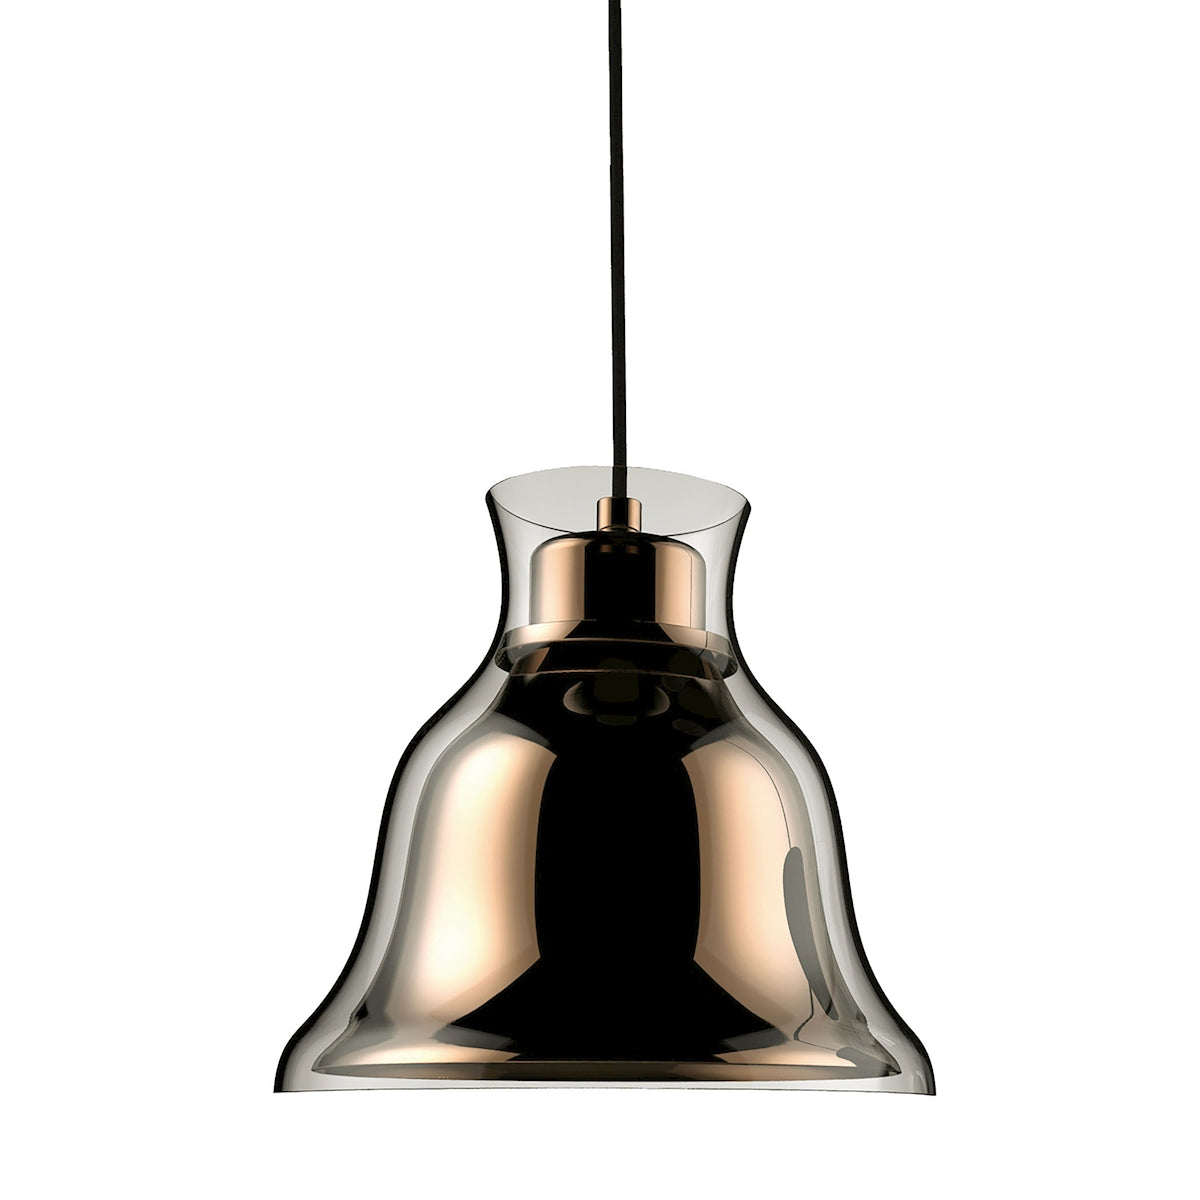 ELK Lighting PS8160-85-31 Bolero 1-Light Mini Pendant in Gold with Bell-shaped Glass and Interior Metal Shade